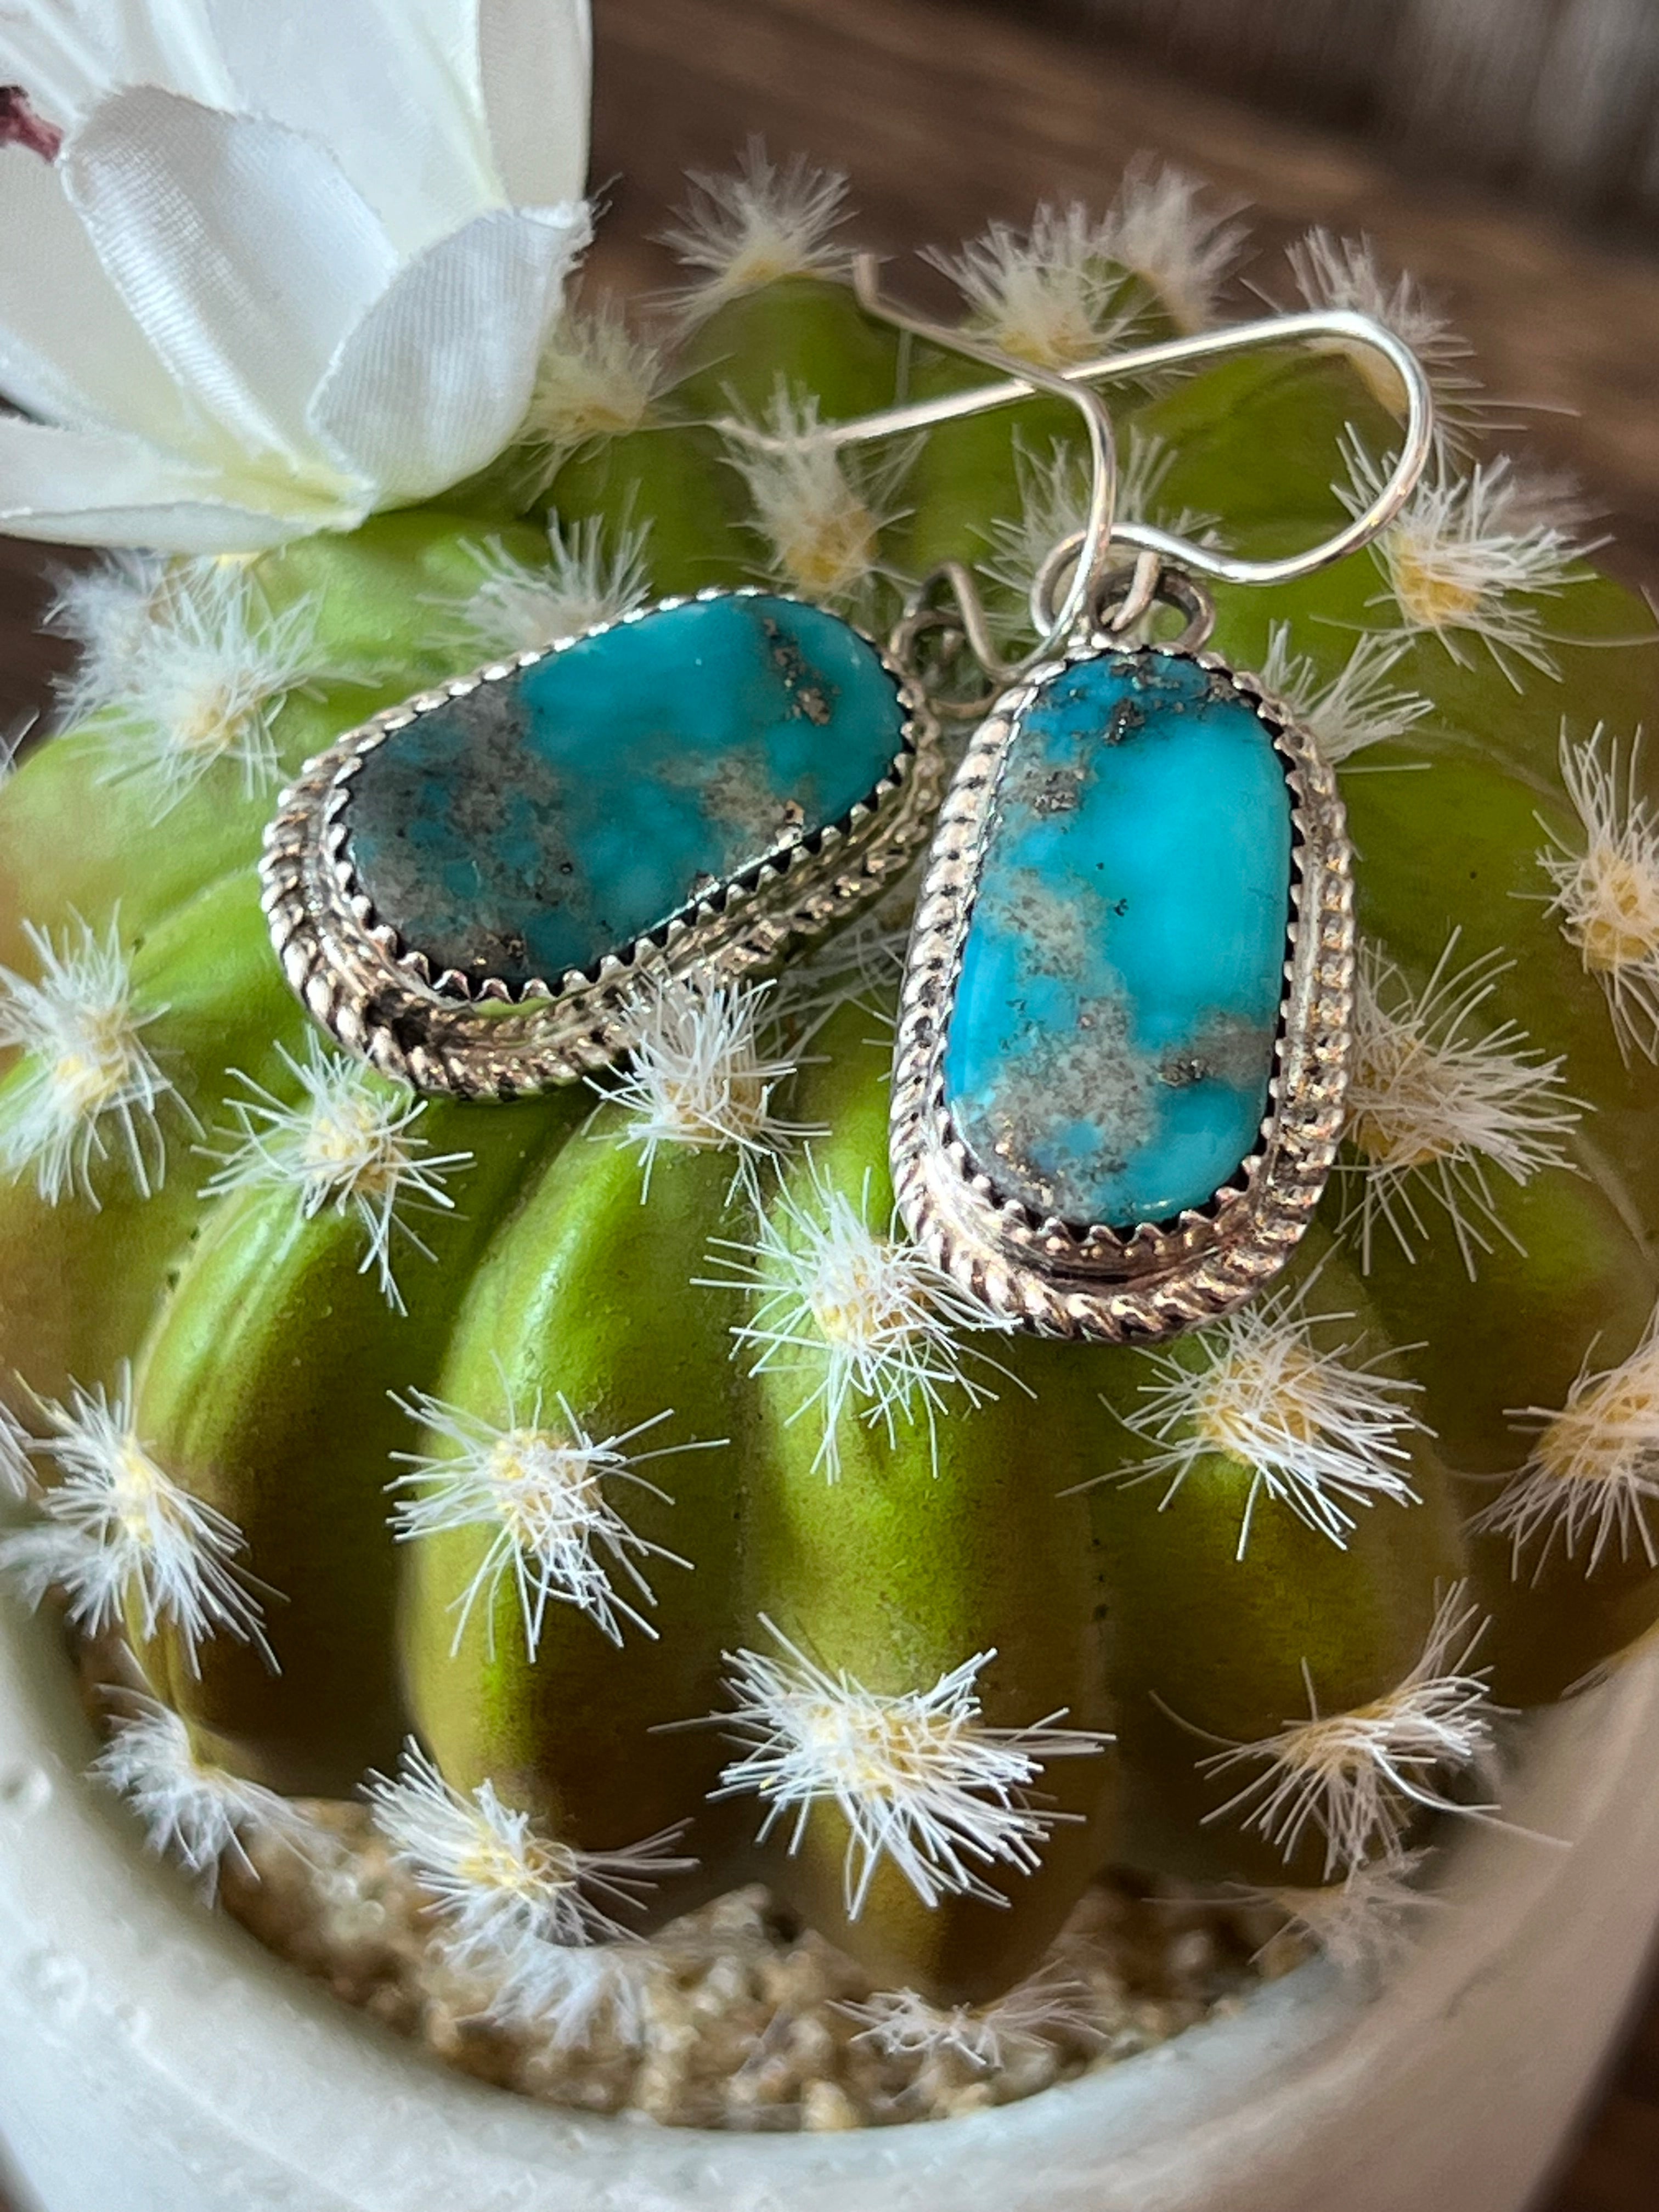 Tempt Me Turquoise Sterling Silver Earrings